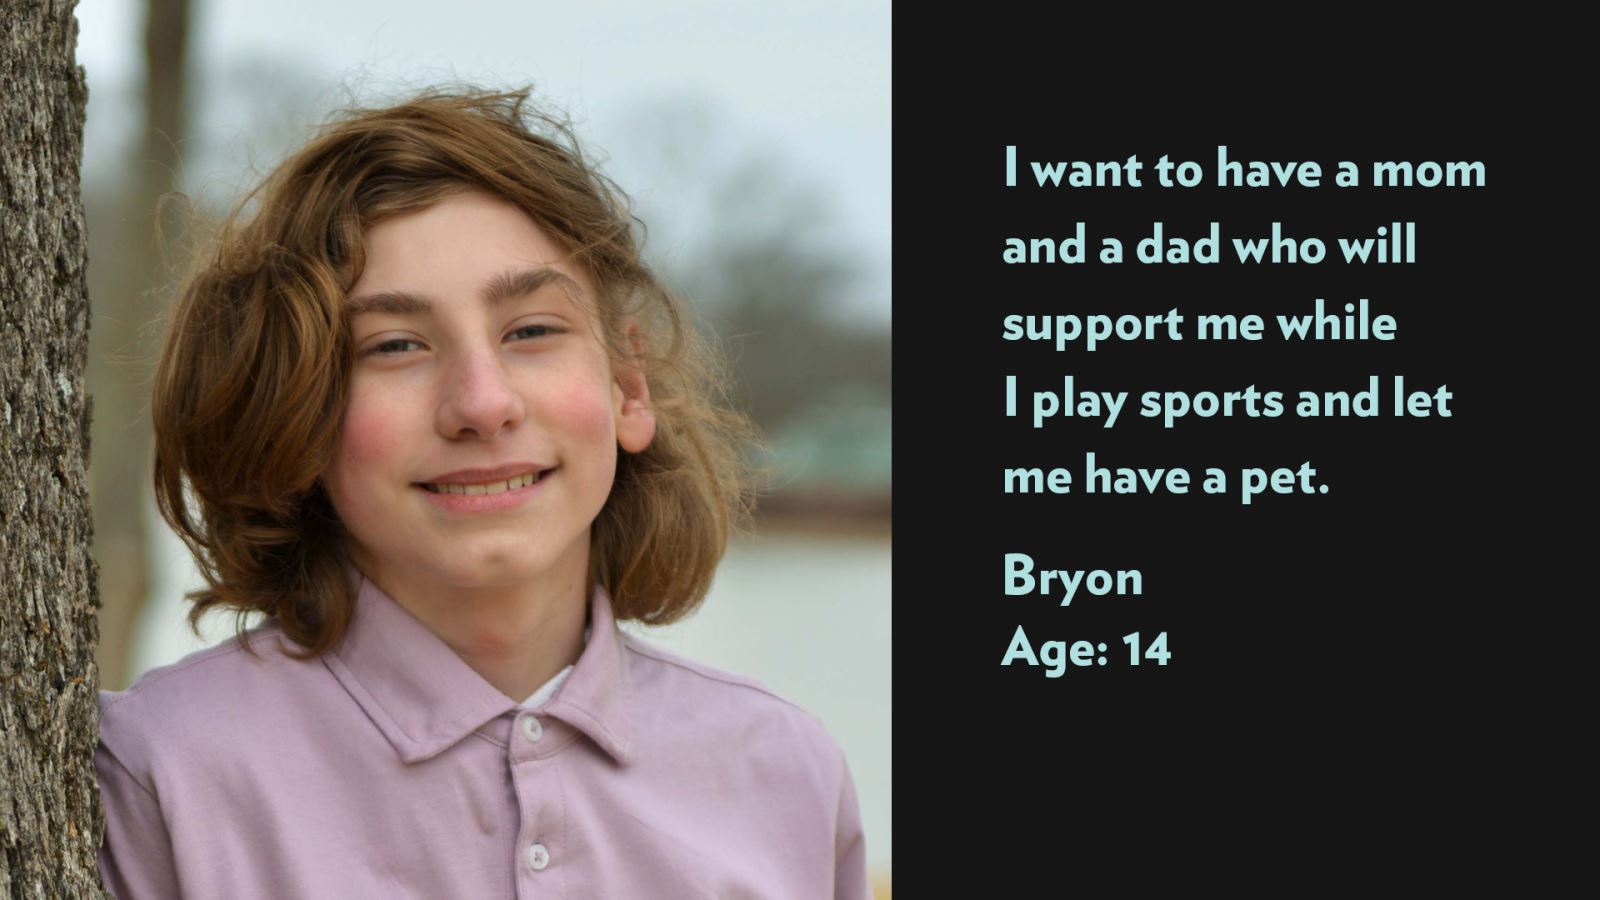 Bryon, age 14. I want to have a mom and a dad who will support me while I play sports and let me have a pet.